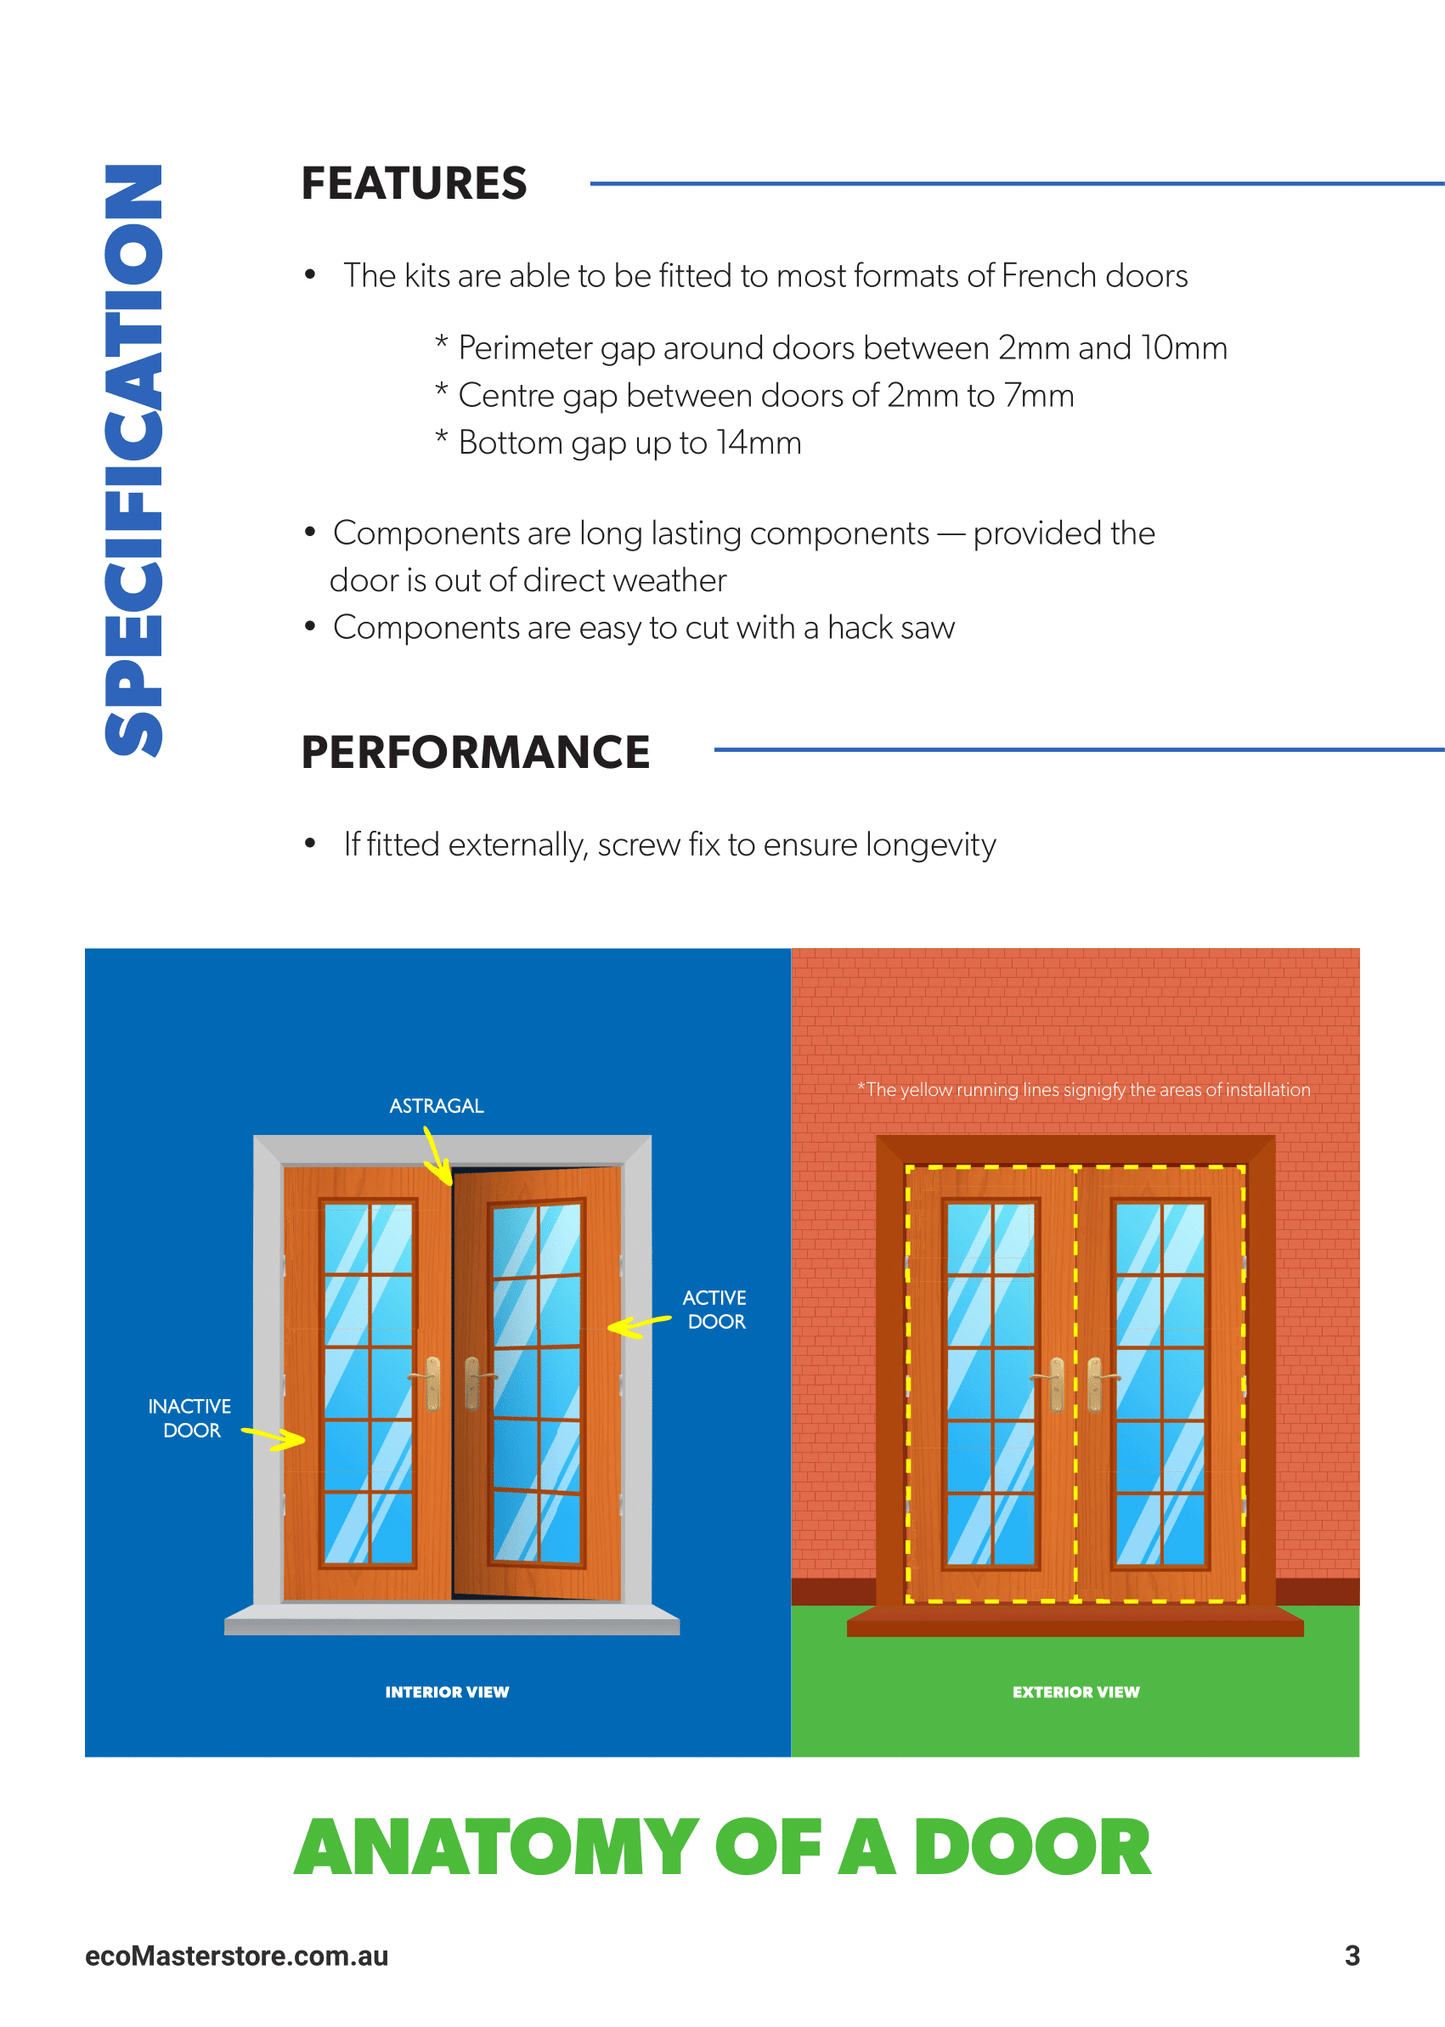 French Doors Draught Proofing | PDF Draught Proofing Guide